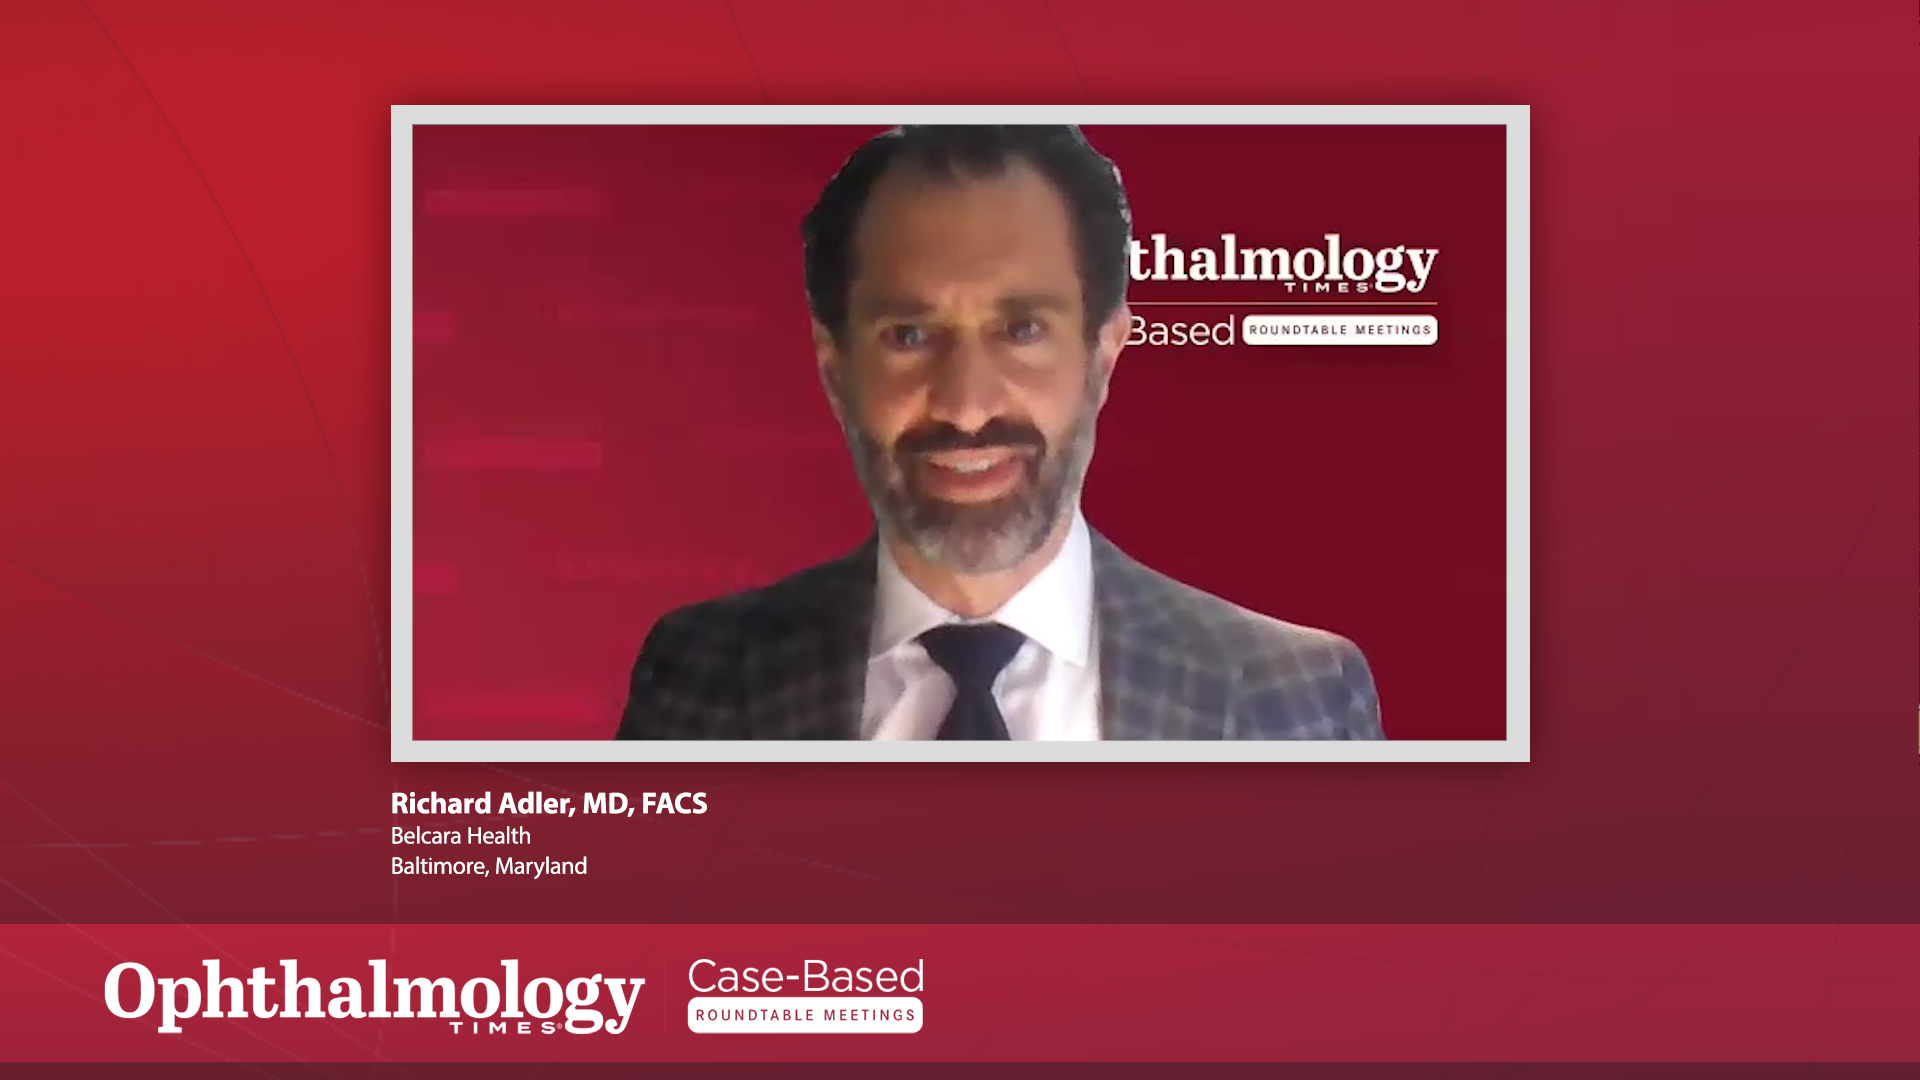 Video 1 - "Challenging the Definition of Dry Eye- Interpreting Diagnostic Tests"